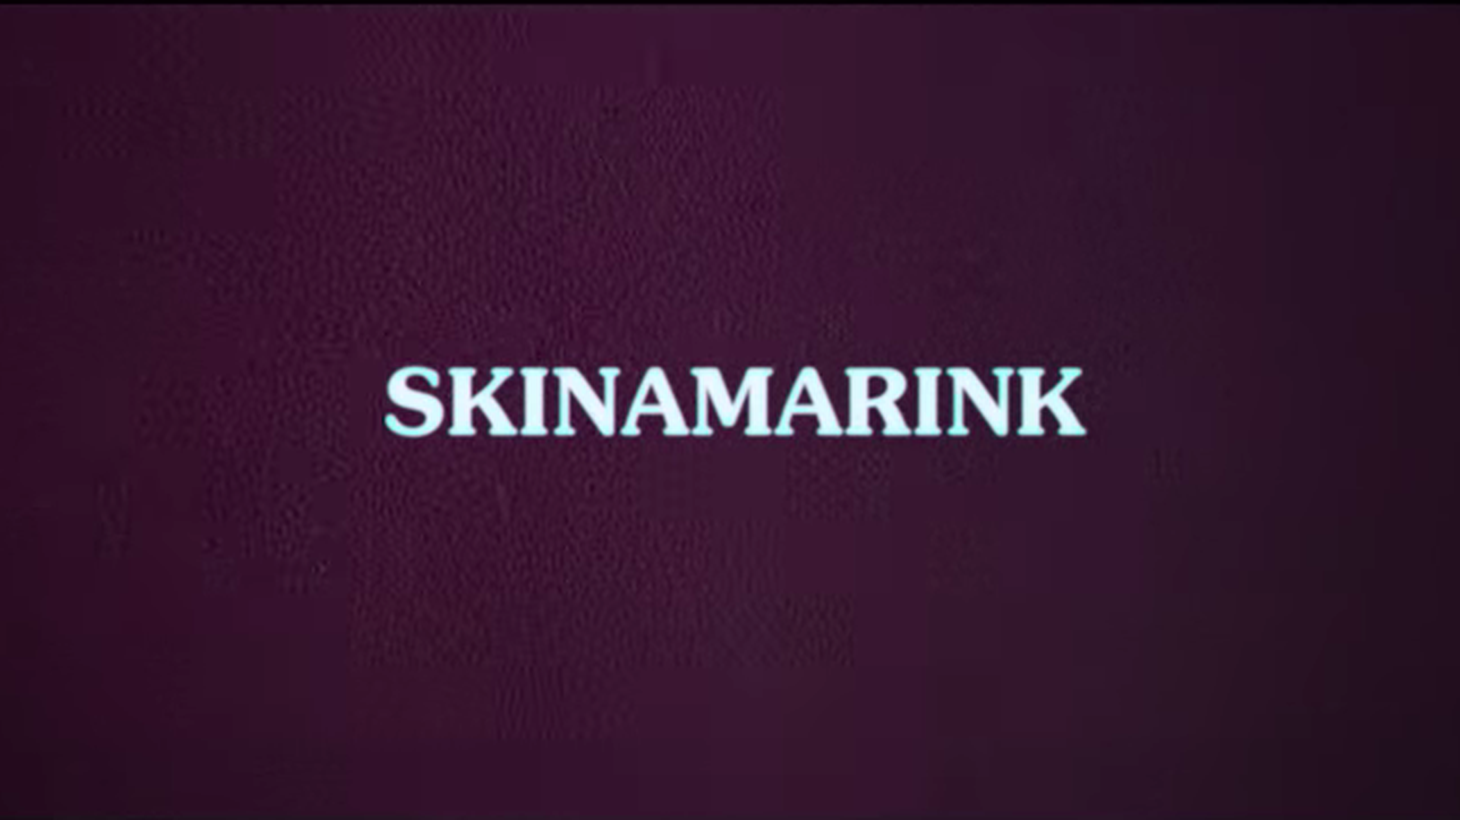 “Skinamarink” is an experimental horror film from Canadian YouTuber Kyle Edward Ball. “It feels so much like a genuine nightmare that you just can't escape the pure unadulterated fright that it's giving you,” says film critic Witney Seibold.